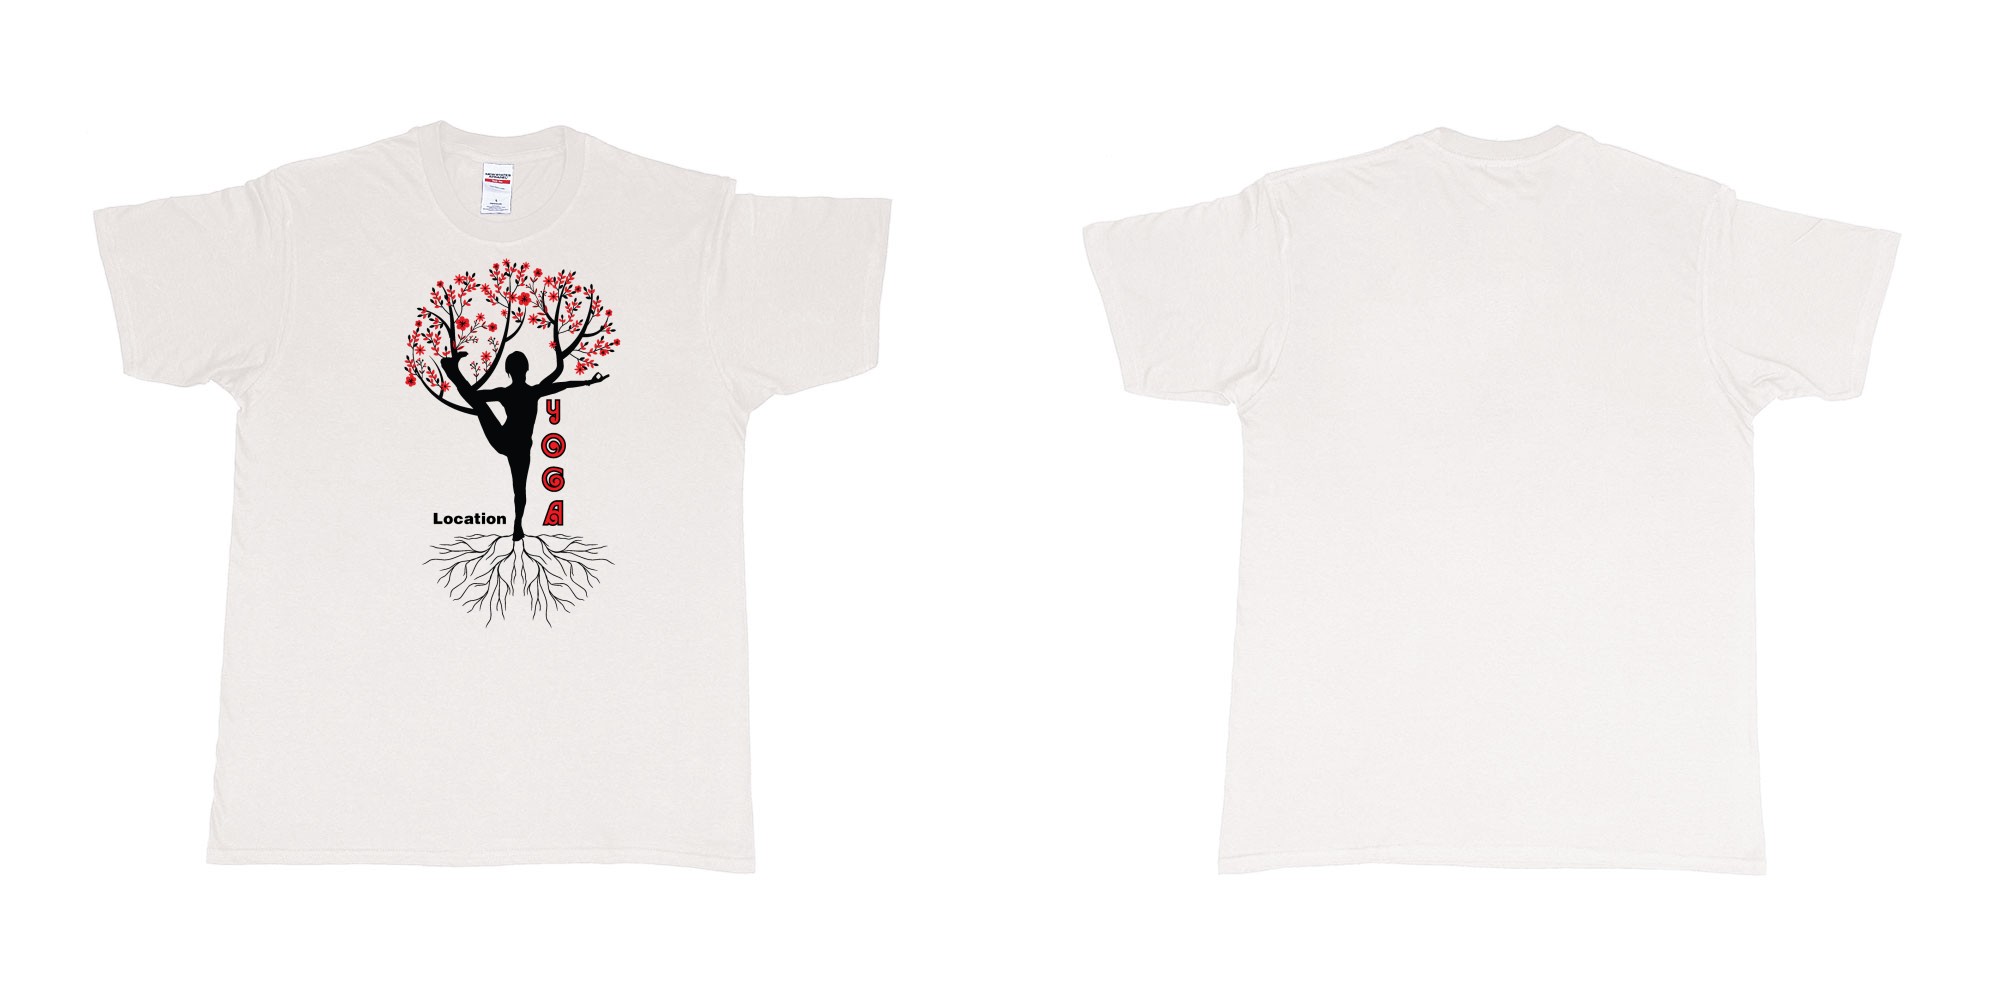 Custom tshirt design yoga tree of life is blooming own logo location design in fabric color white choice your own text made in Bali by The Pirate Way